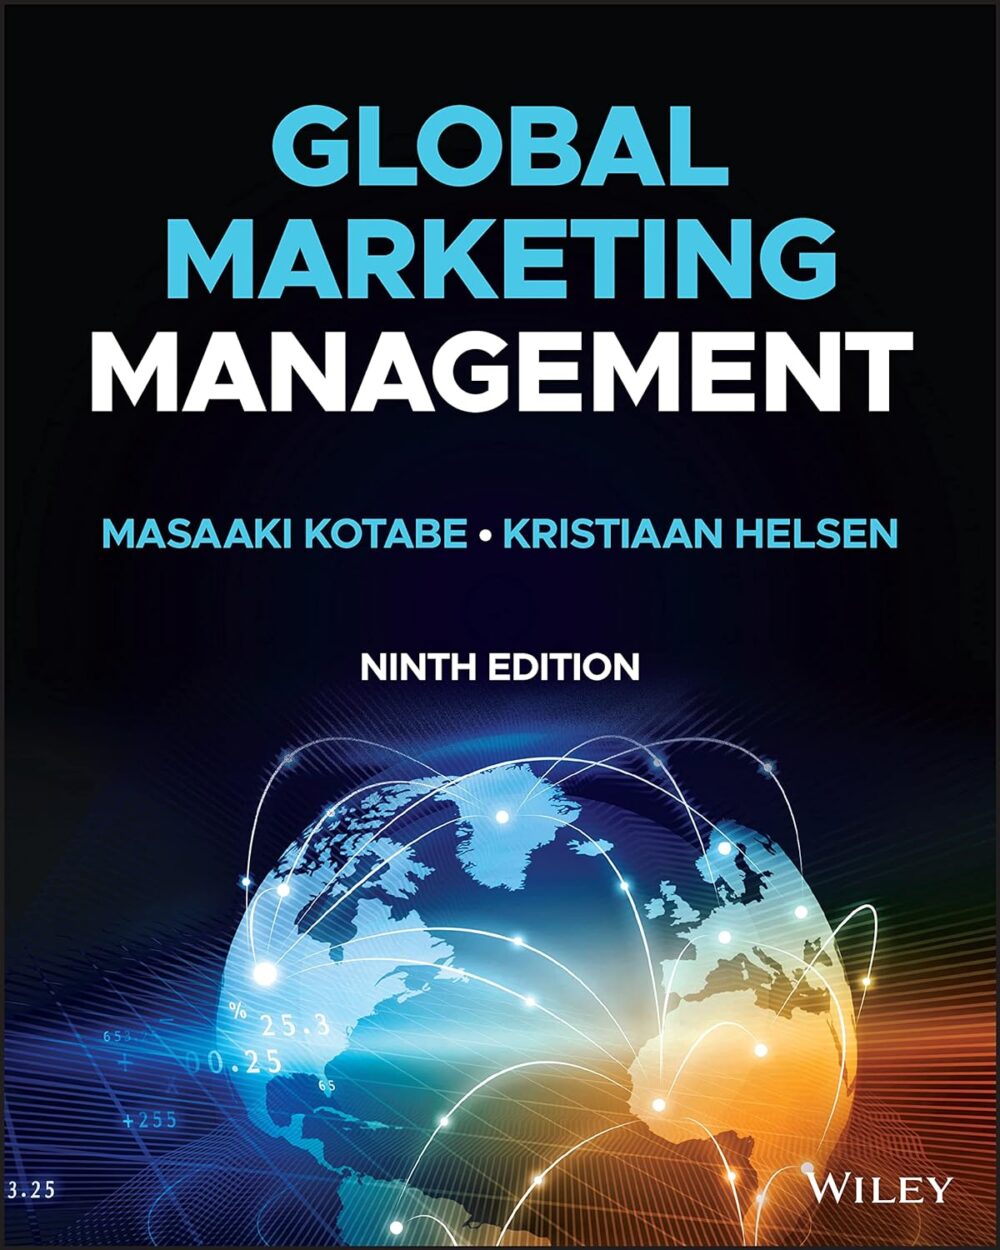 Global Marketing Management 9th Edition 1 Global Marketing Management 9th Edition